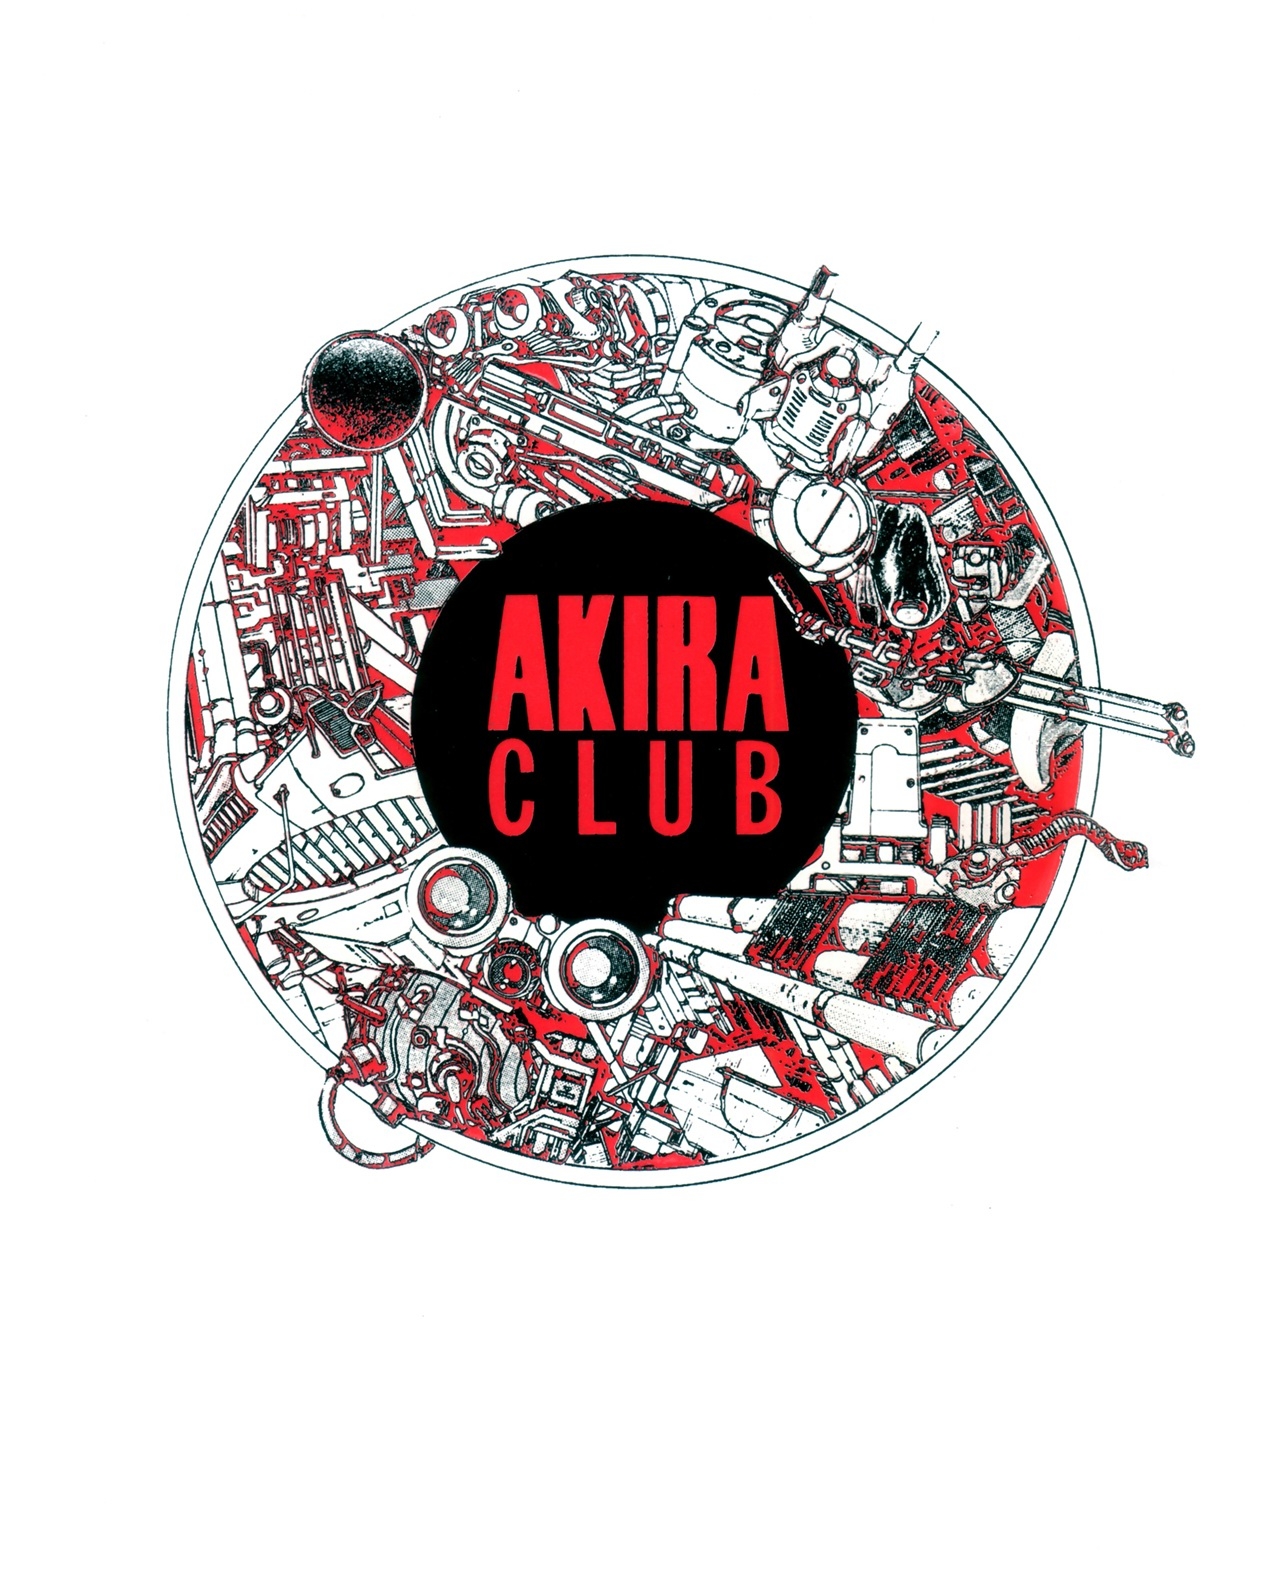 Akira club - The memory of Akira lives on in our hearts! 2